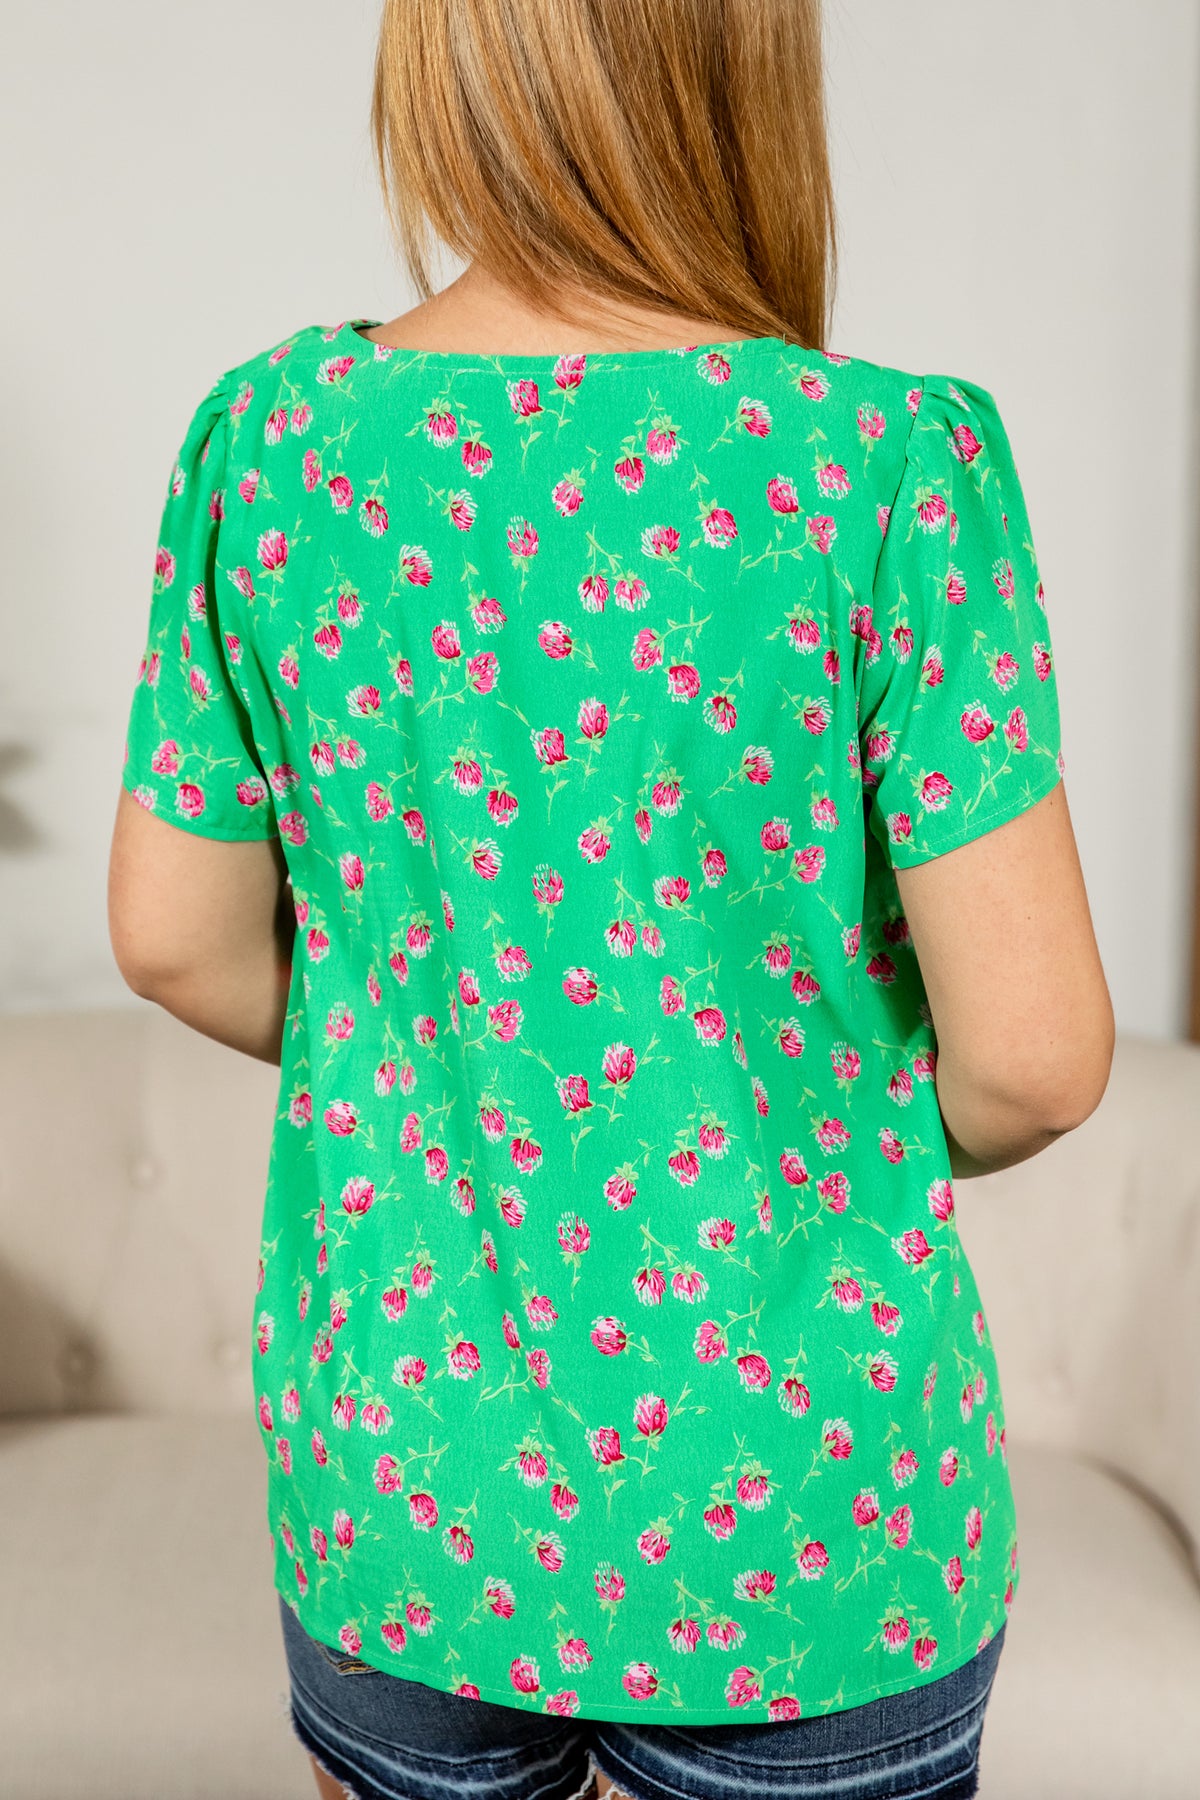 GREEN/PINK FLORAL SCALLOPED NECKLINE BLOUSE